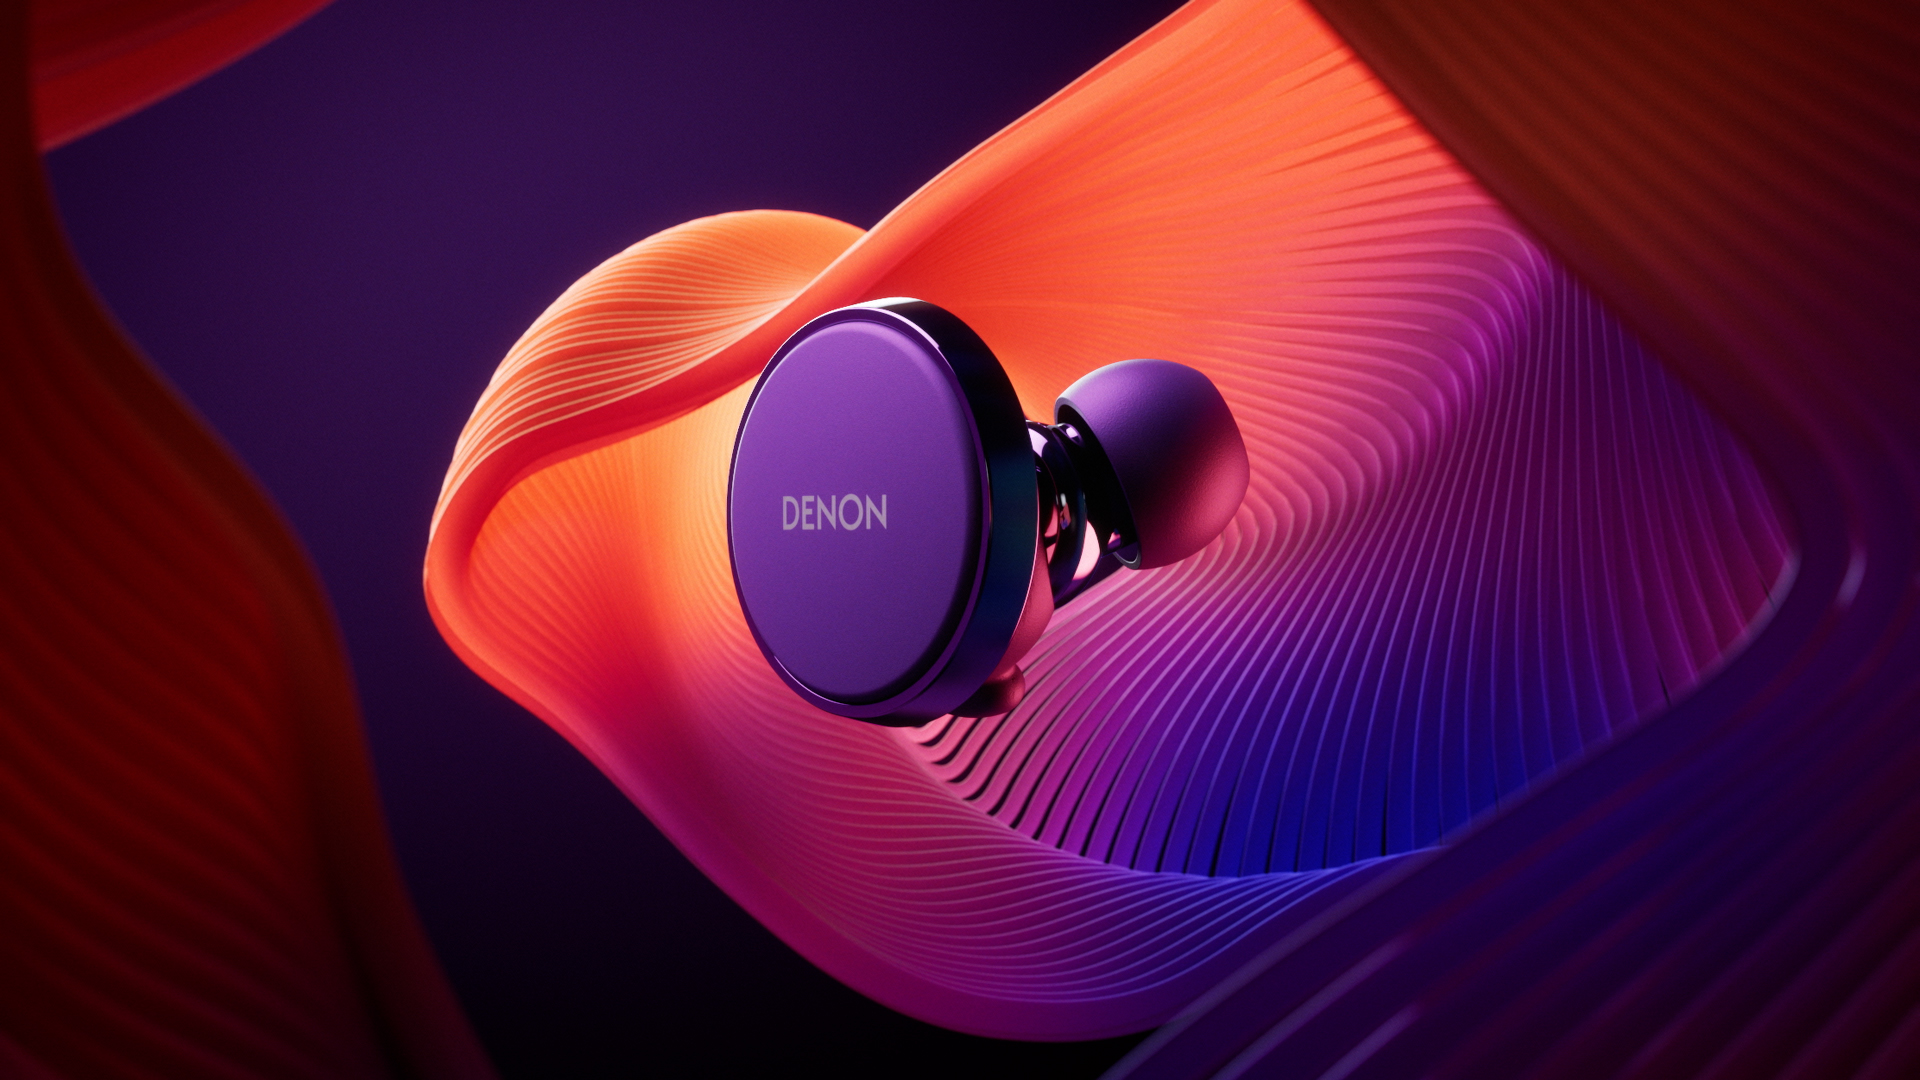 Denon PerL Earbuds range is redefining personalised sound - Rolling Stone UK